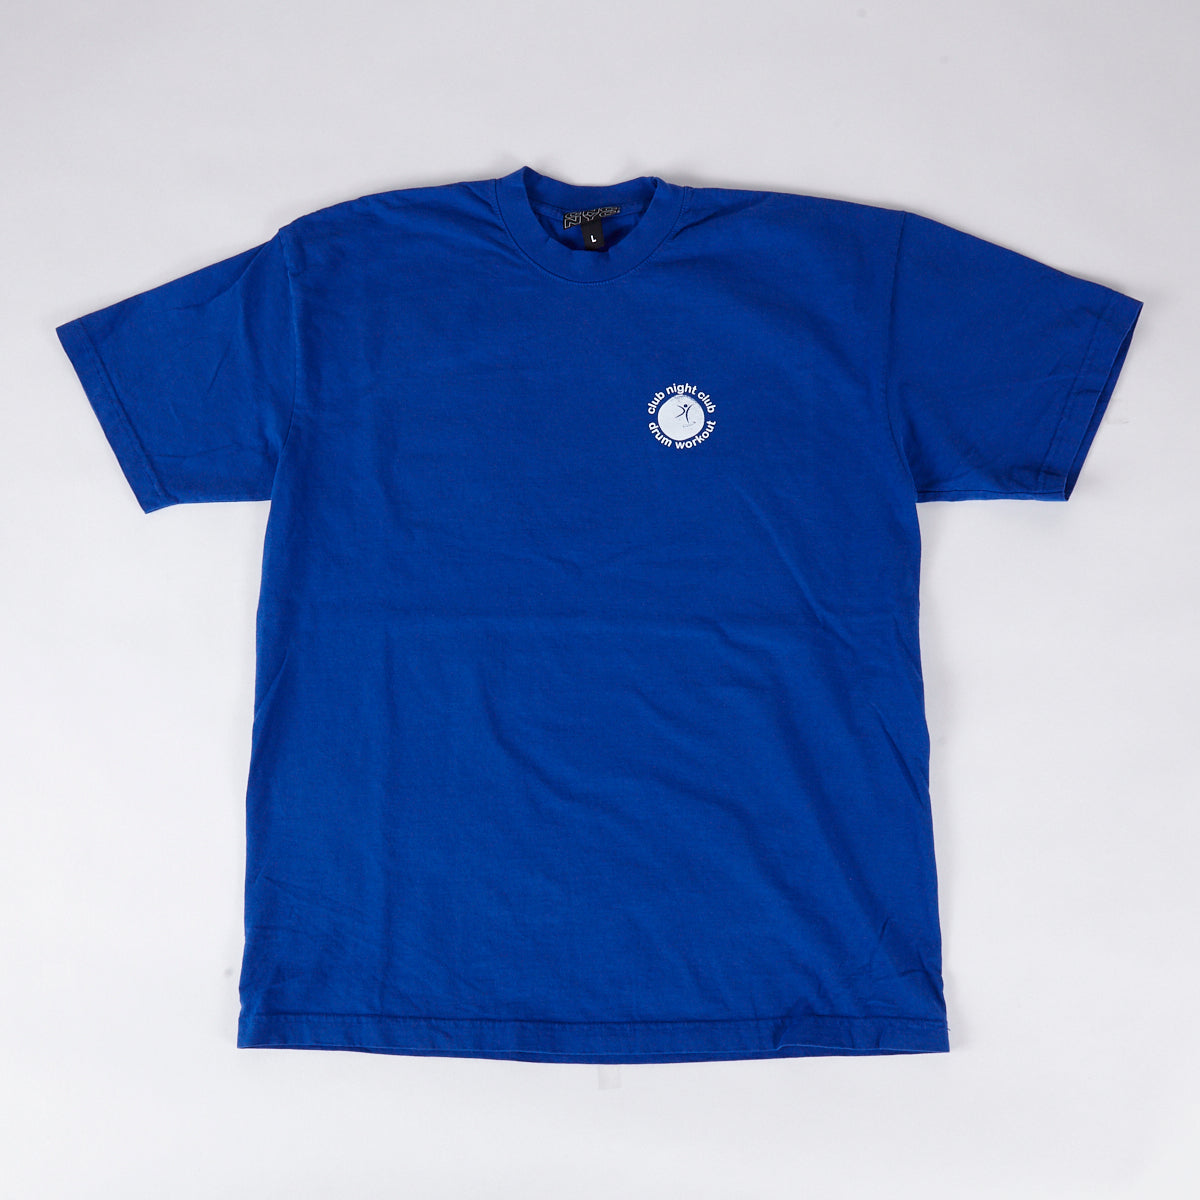 Drum Workout Tee - Tech 1 [Blue] Sold Out